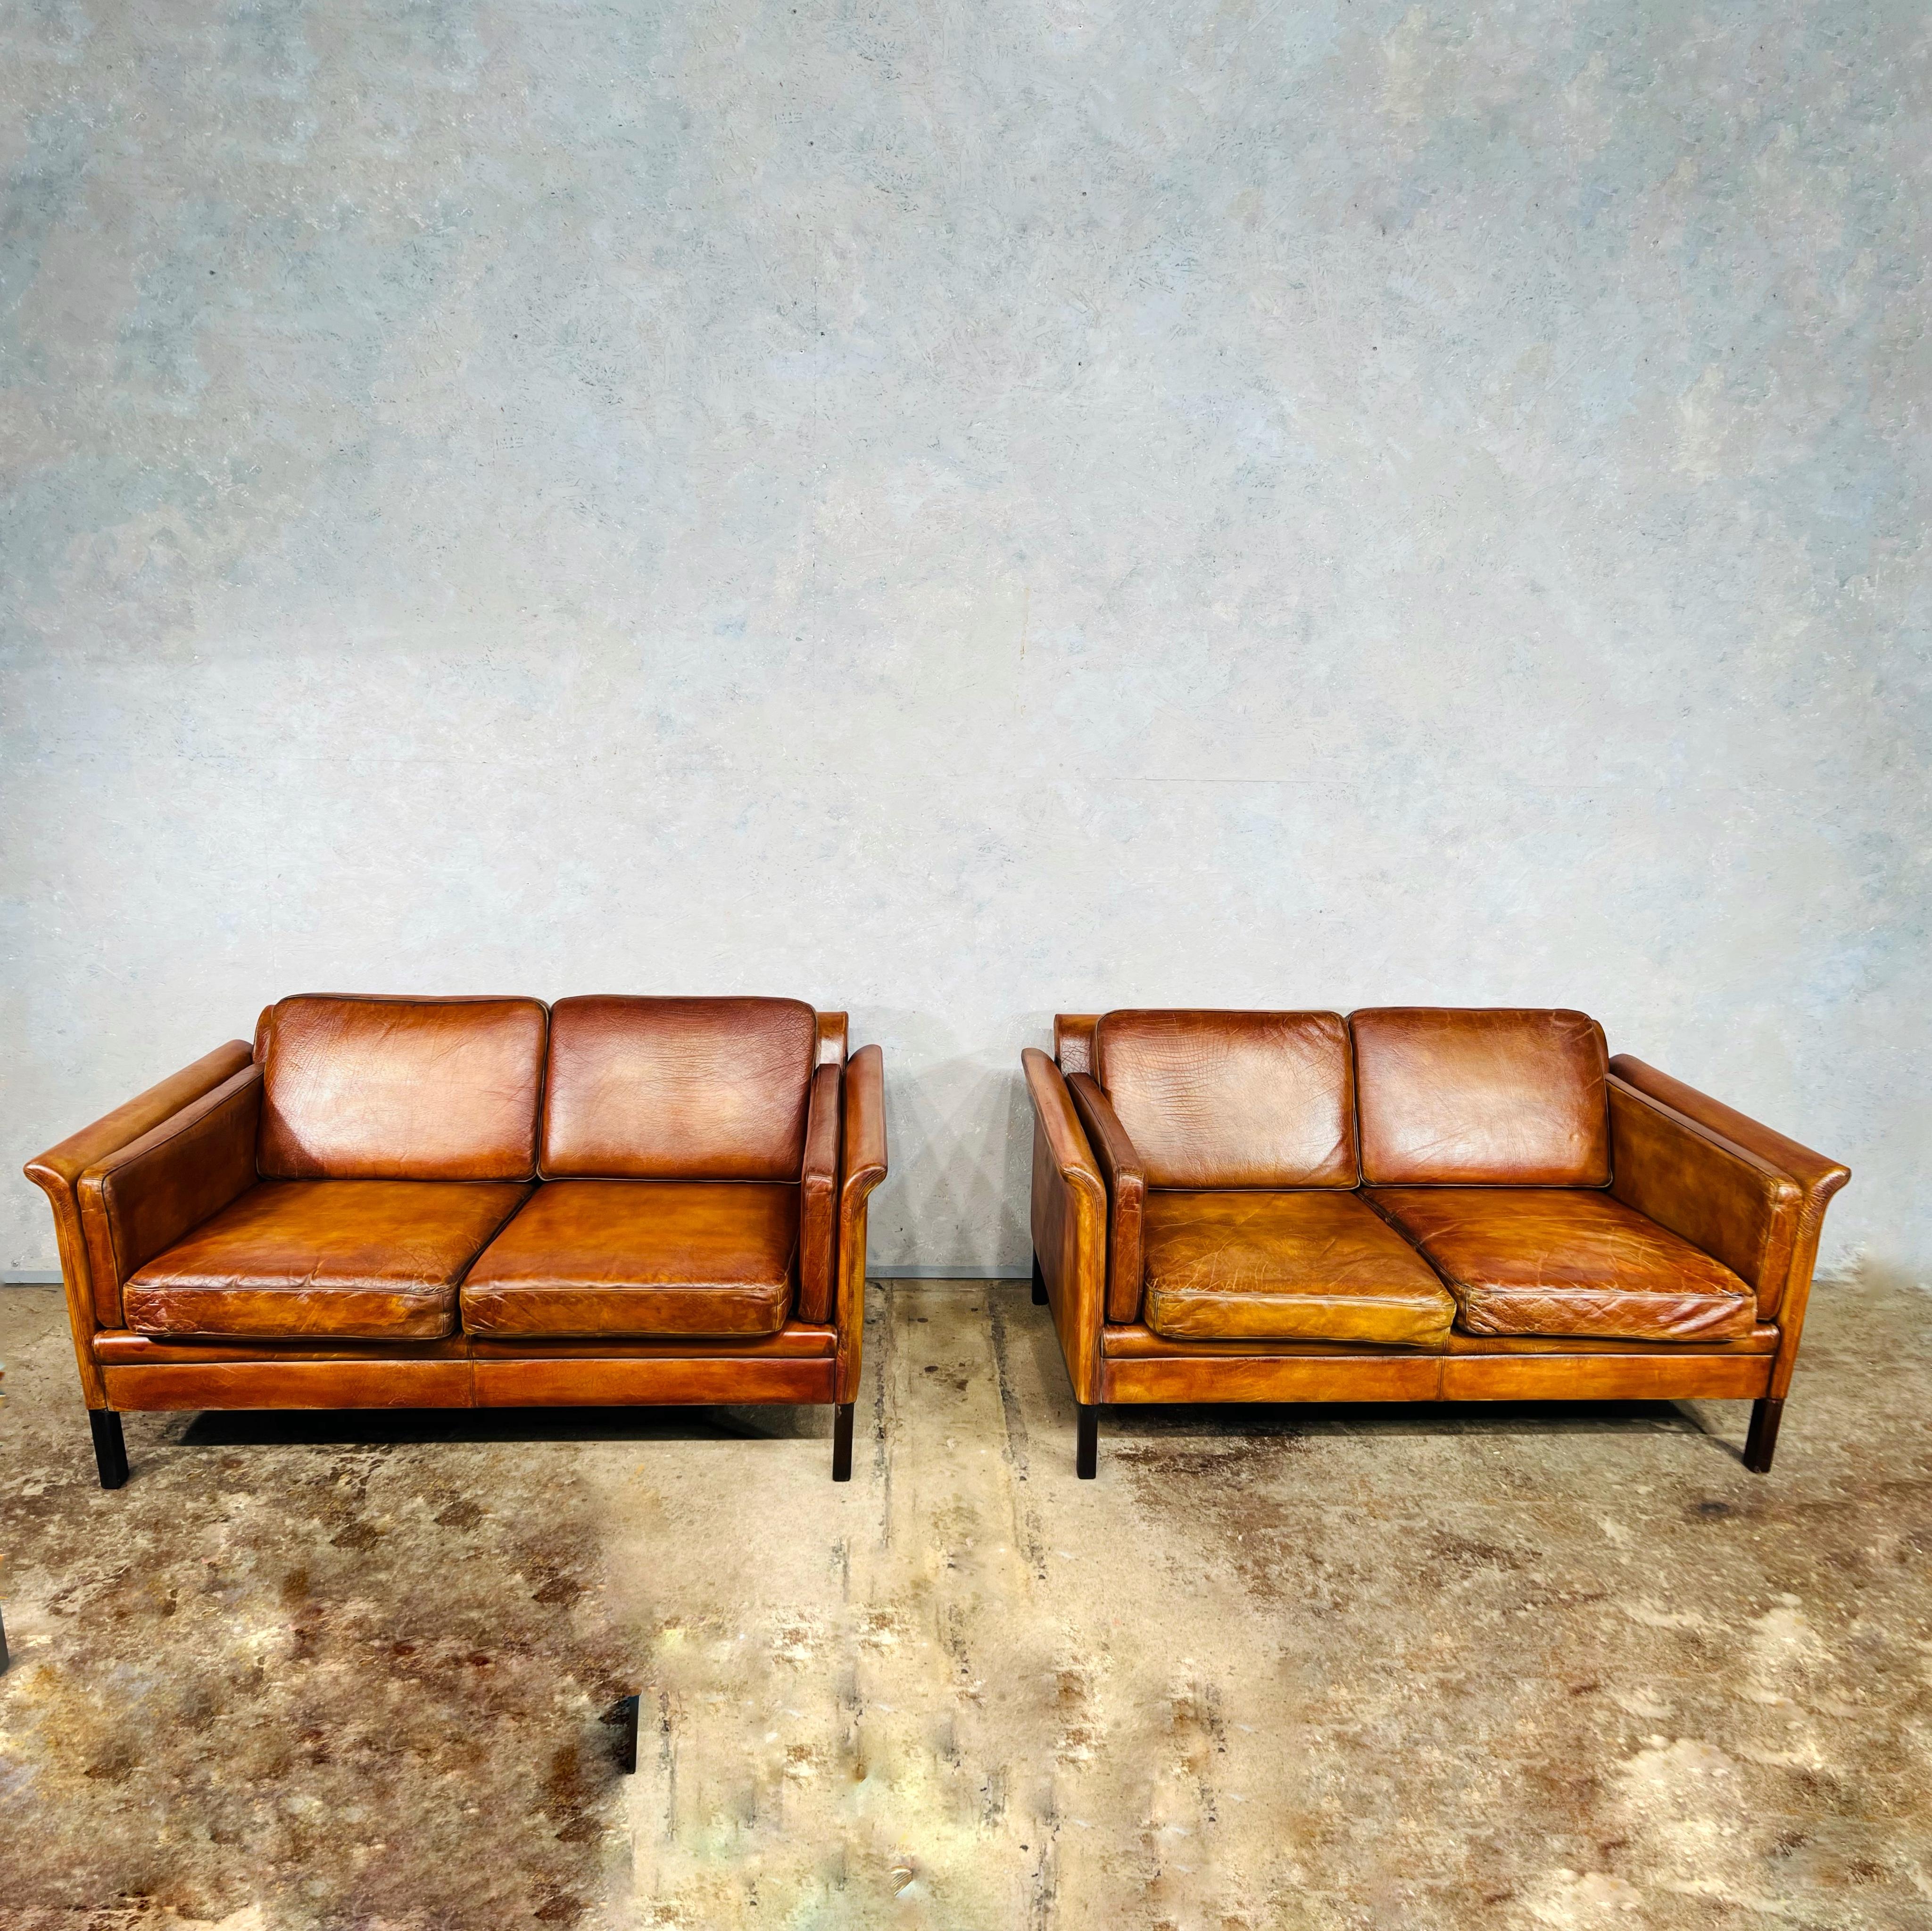 A pair of stylish and neat Danish 1970s sofa, great design with slanted back, very comfortable to sit in.

The leather is great quality, deeply grained, with a beautiful tan colour, patina and finish.

Viewings welcome at our showroom in Lewes,